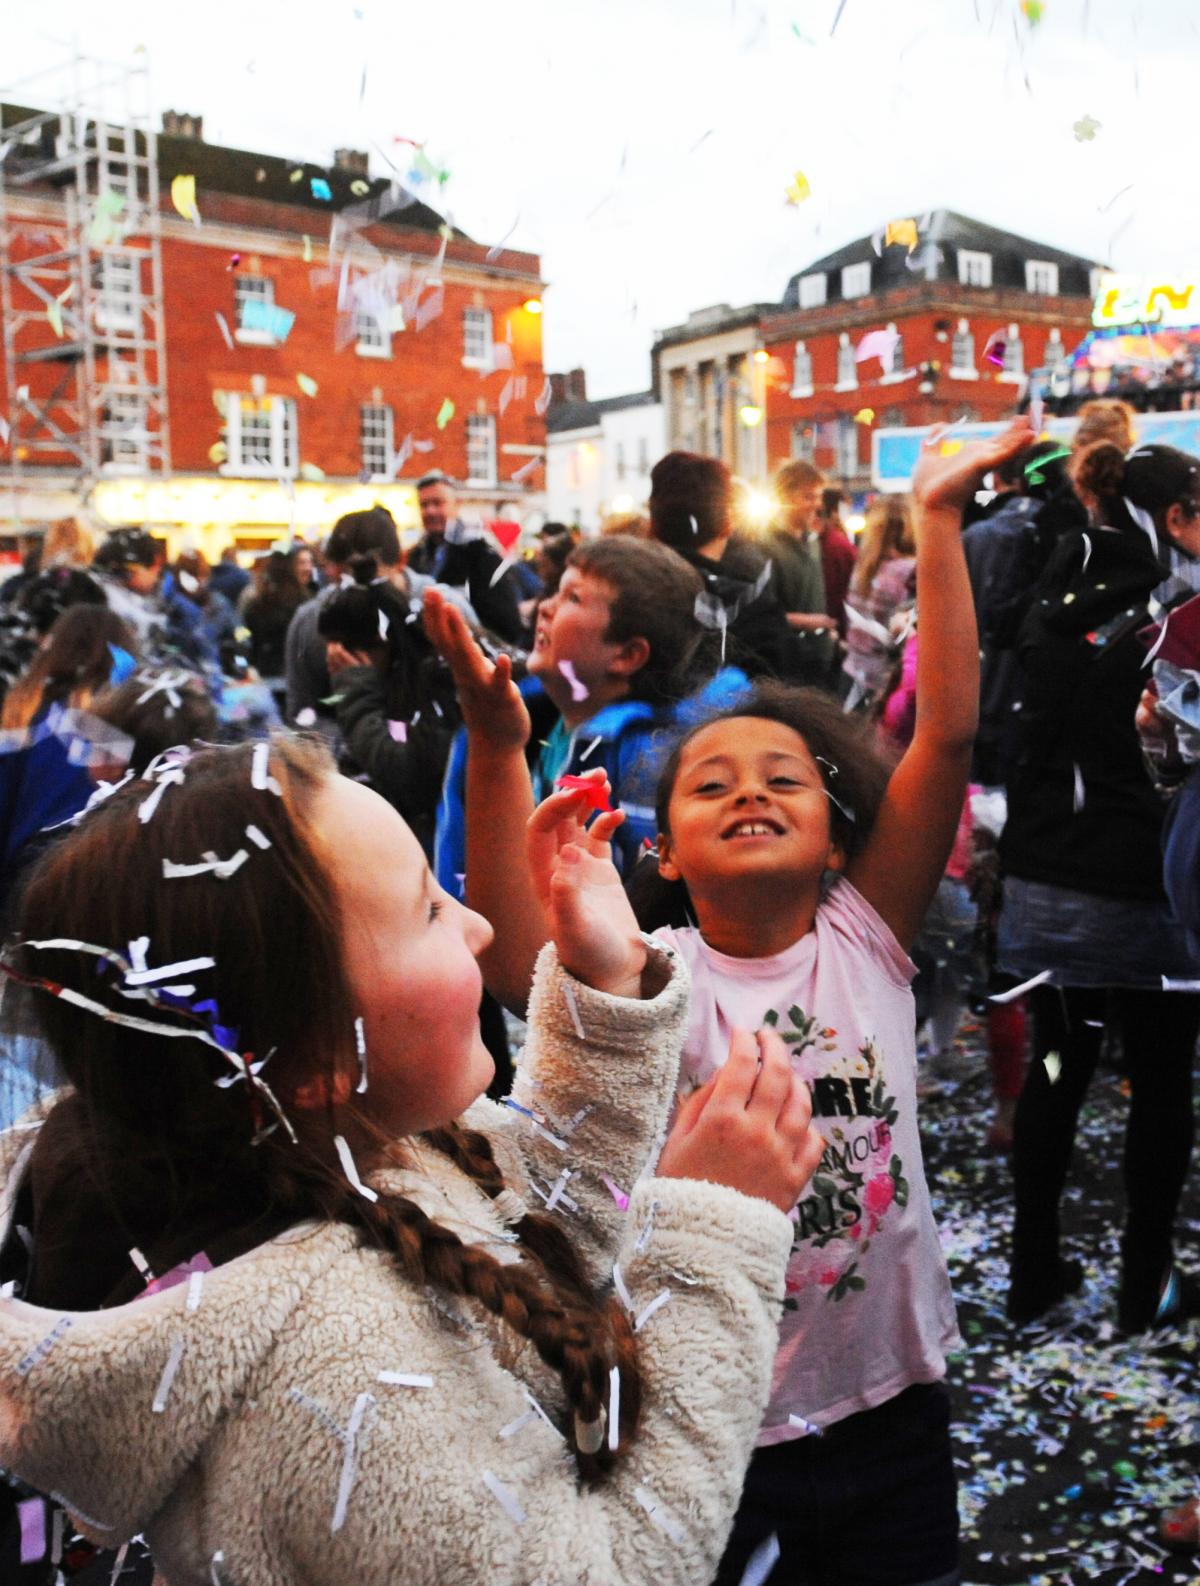 Siobhan Boyle gets in among the action at Devizes Confetti Battle, which kicks off Devizes Carnival celebrations